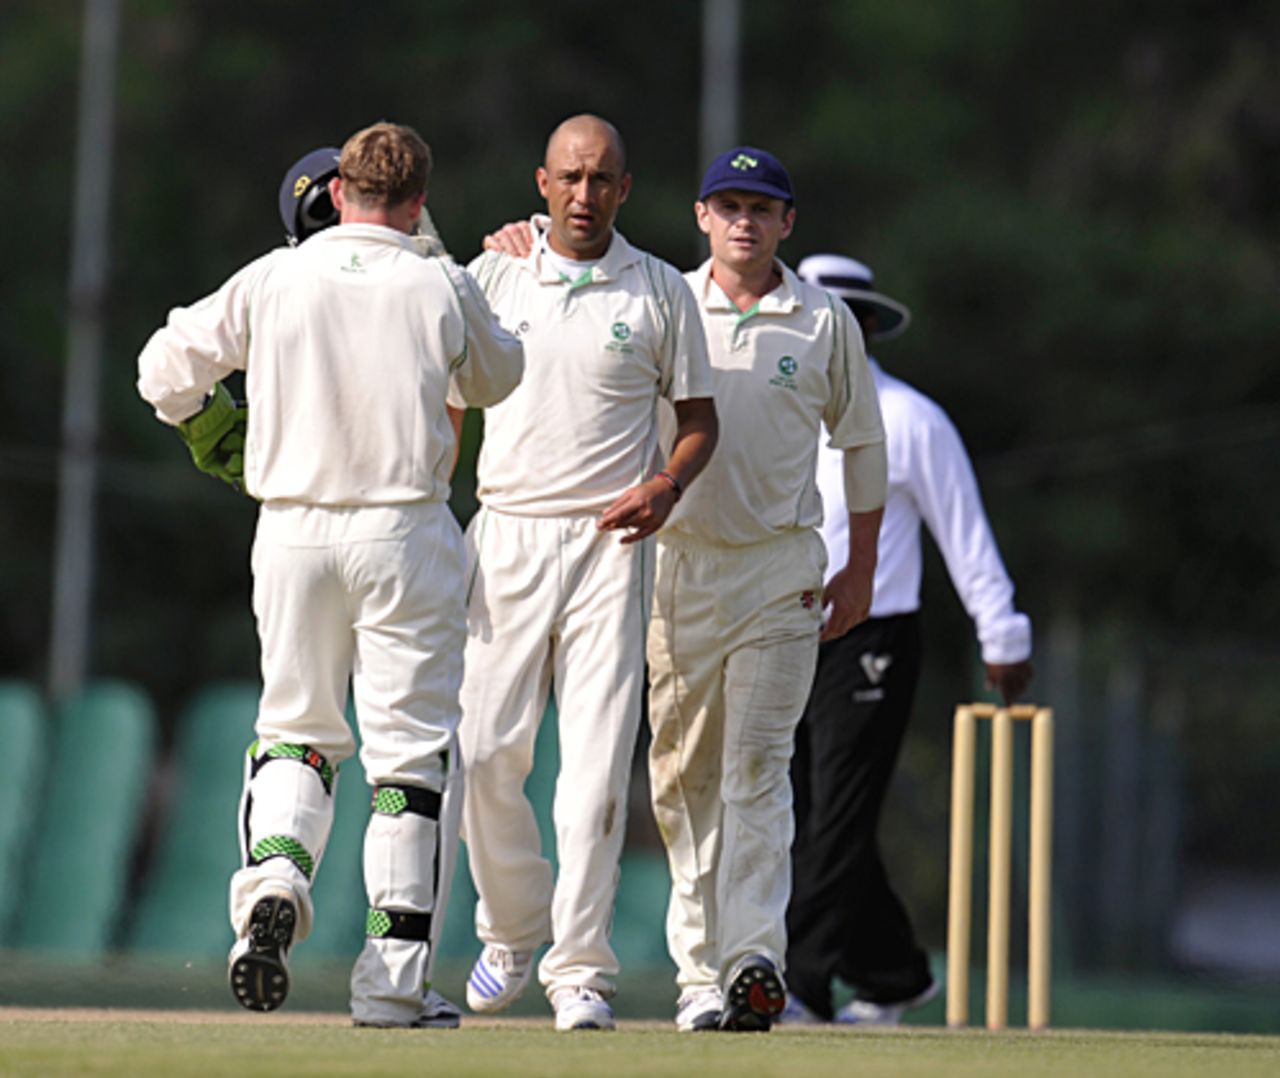 Andre Botha took three Afghanistan wickets, Afghanistan v Ireland, ICC Intercontinental Cup, Dambulla, 3rd day, January 23, 2010